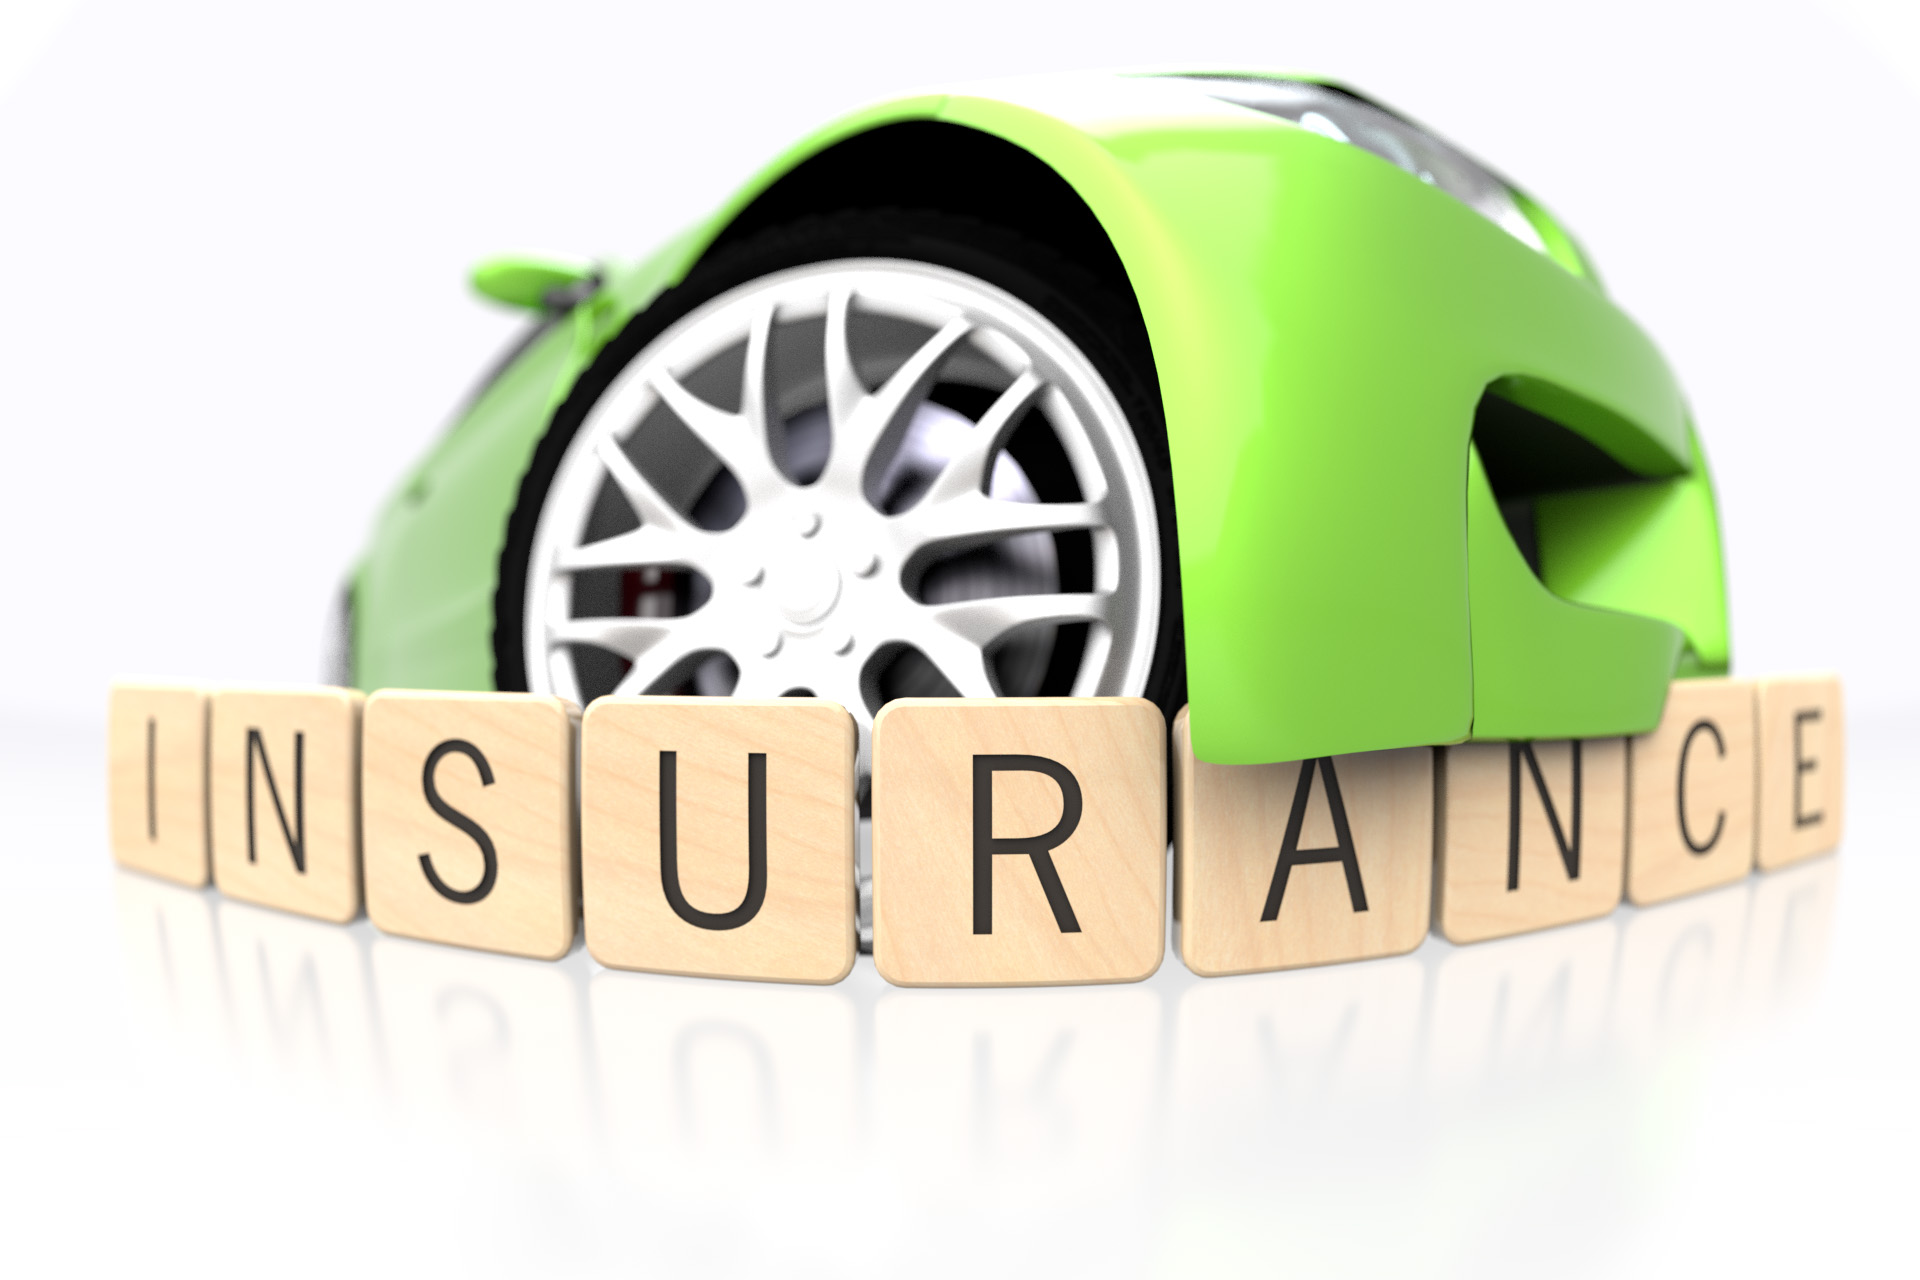 Green car insurance concept free image download